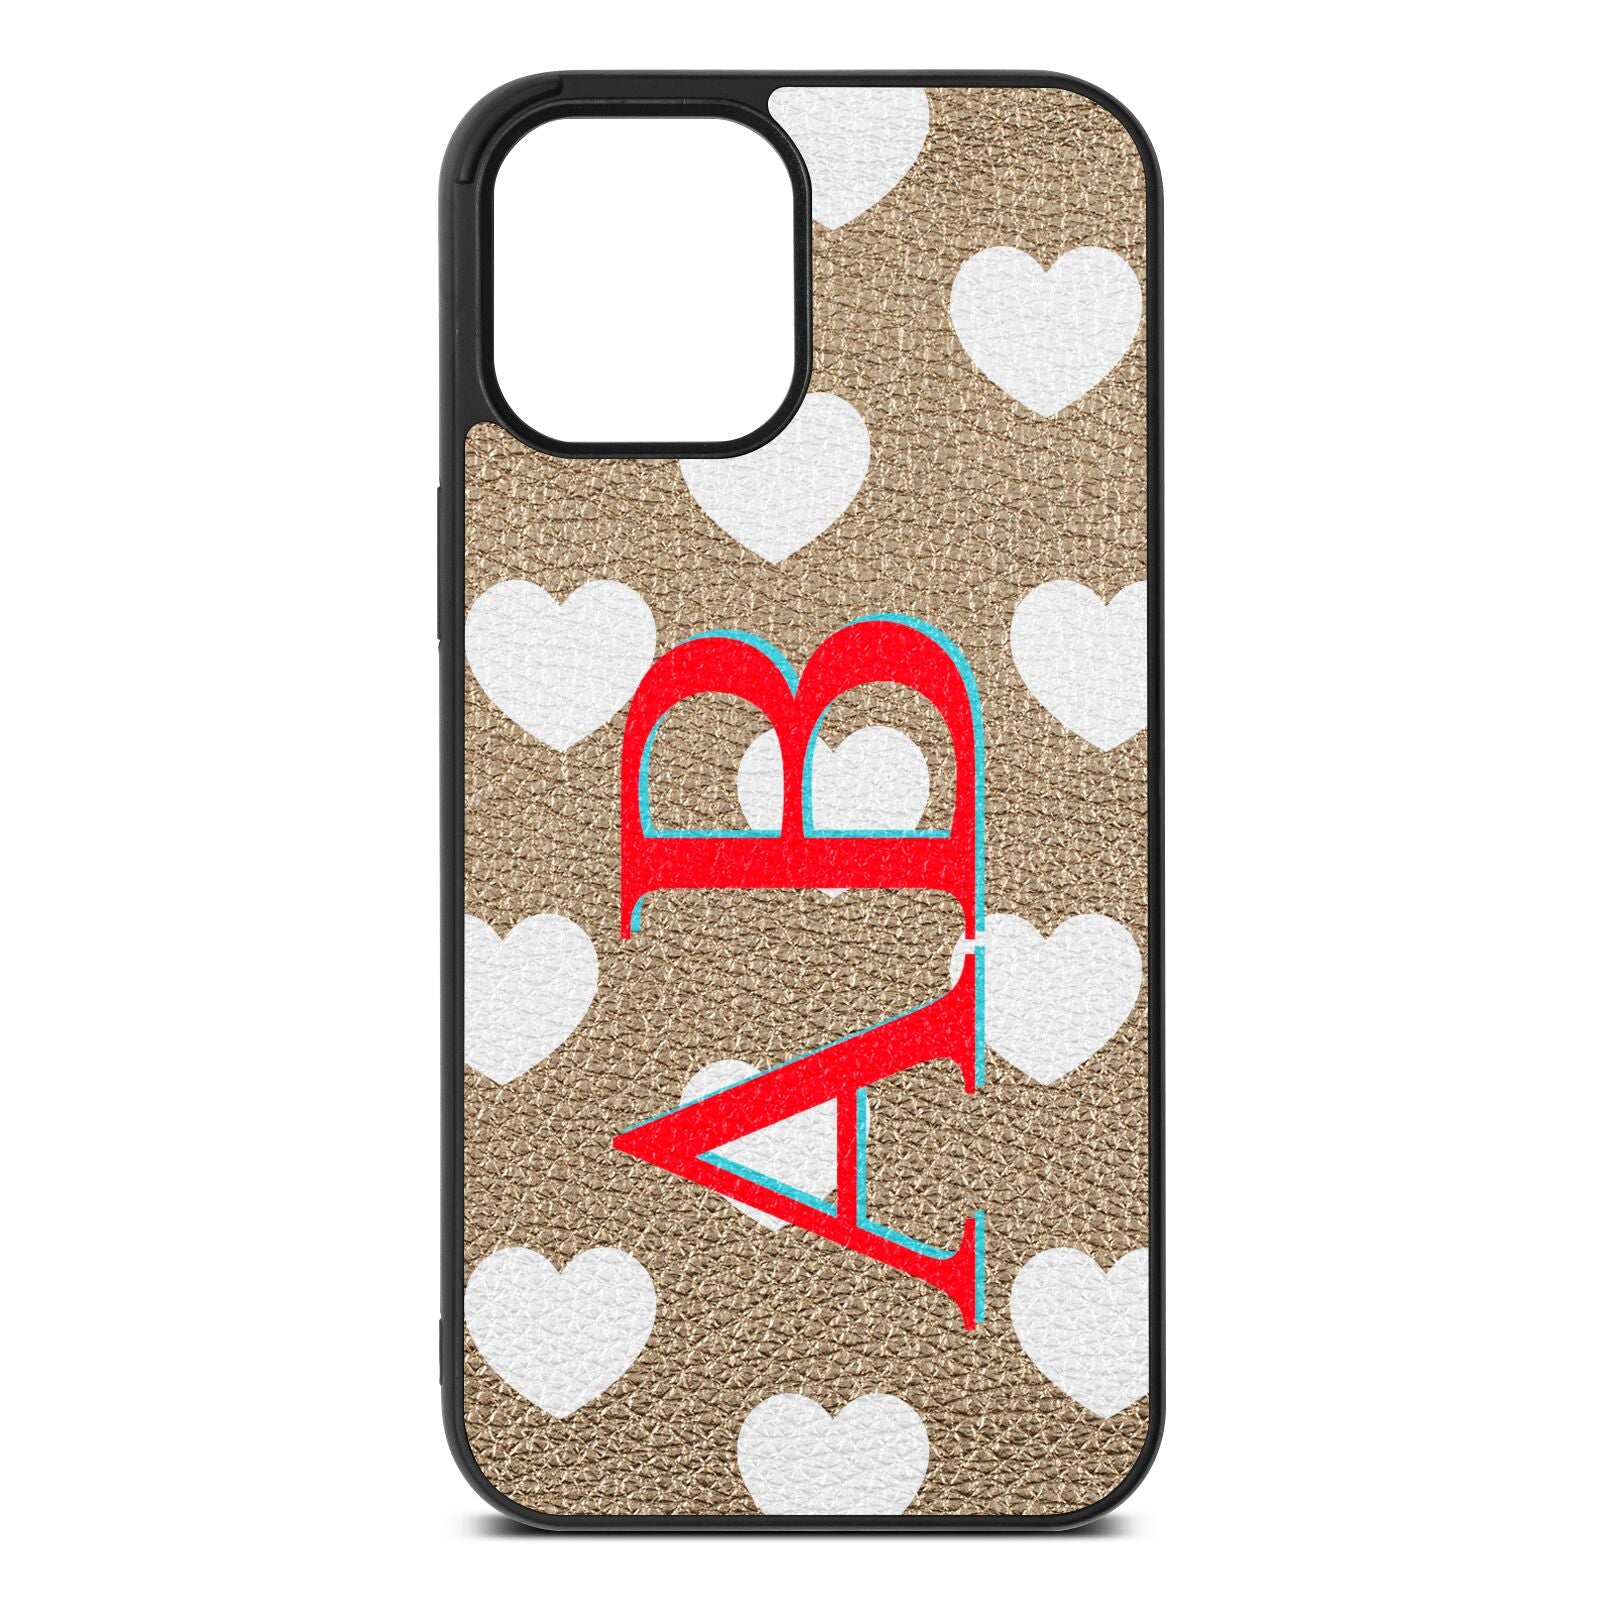 Heart Print Initials Gold Pebble Leather iPhone 12 Pro Max Case